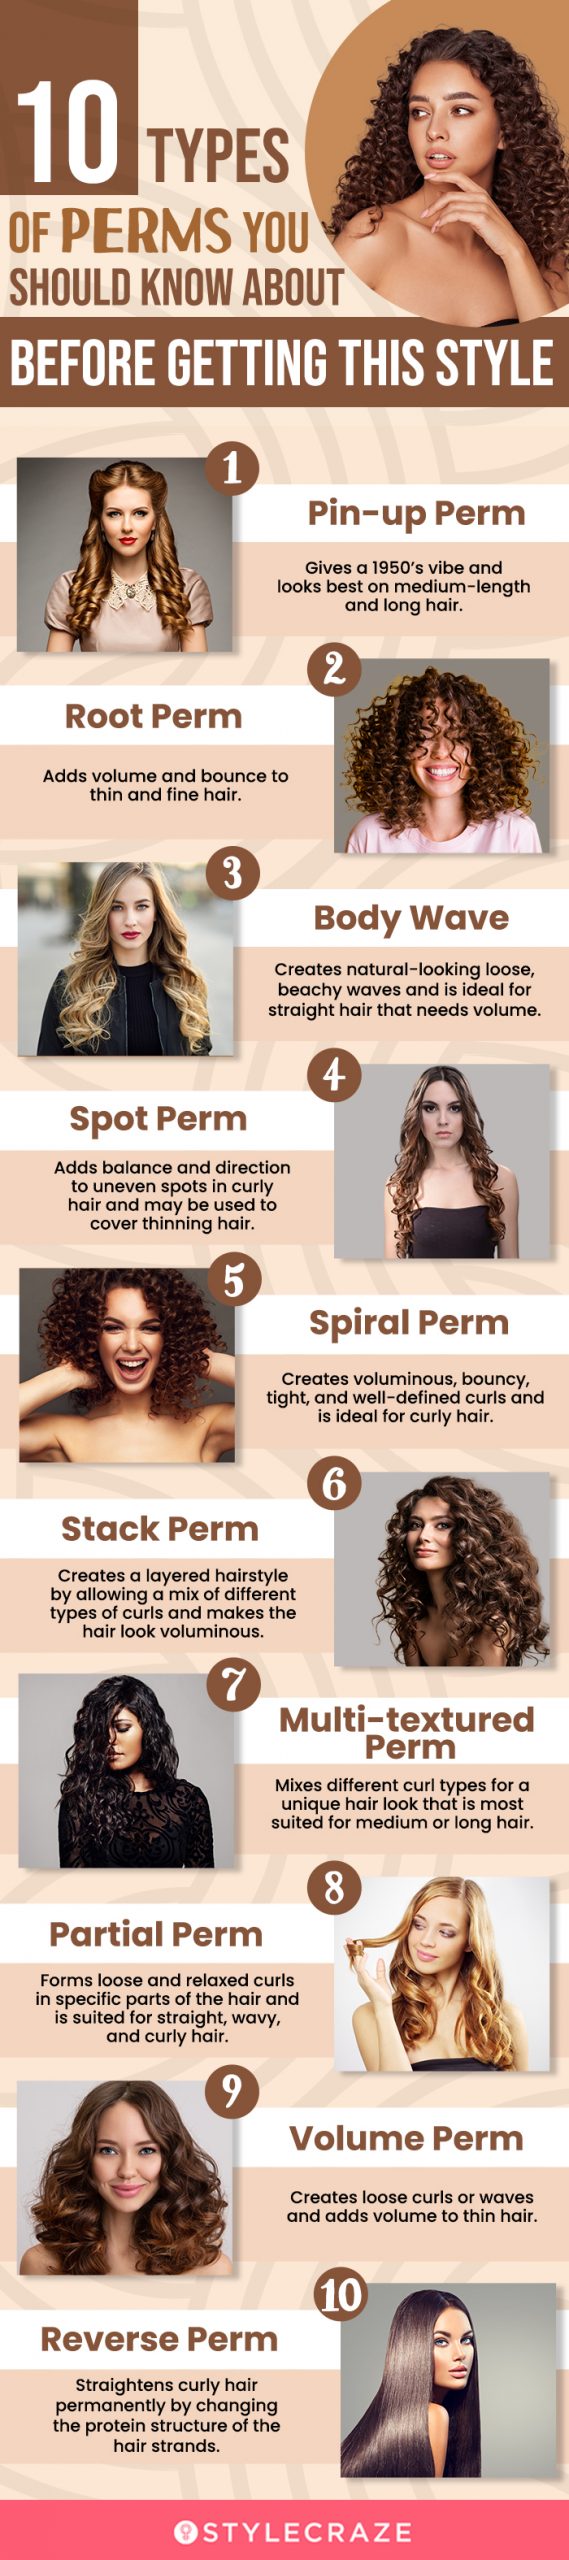 10 types of perms (infographic)